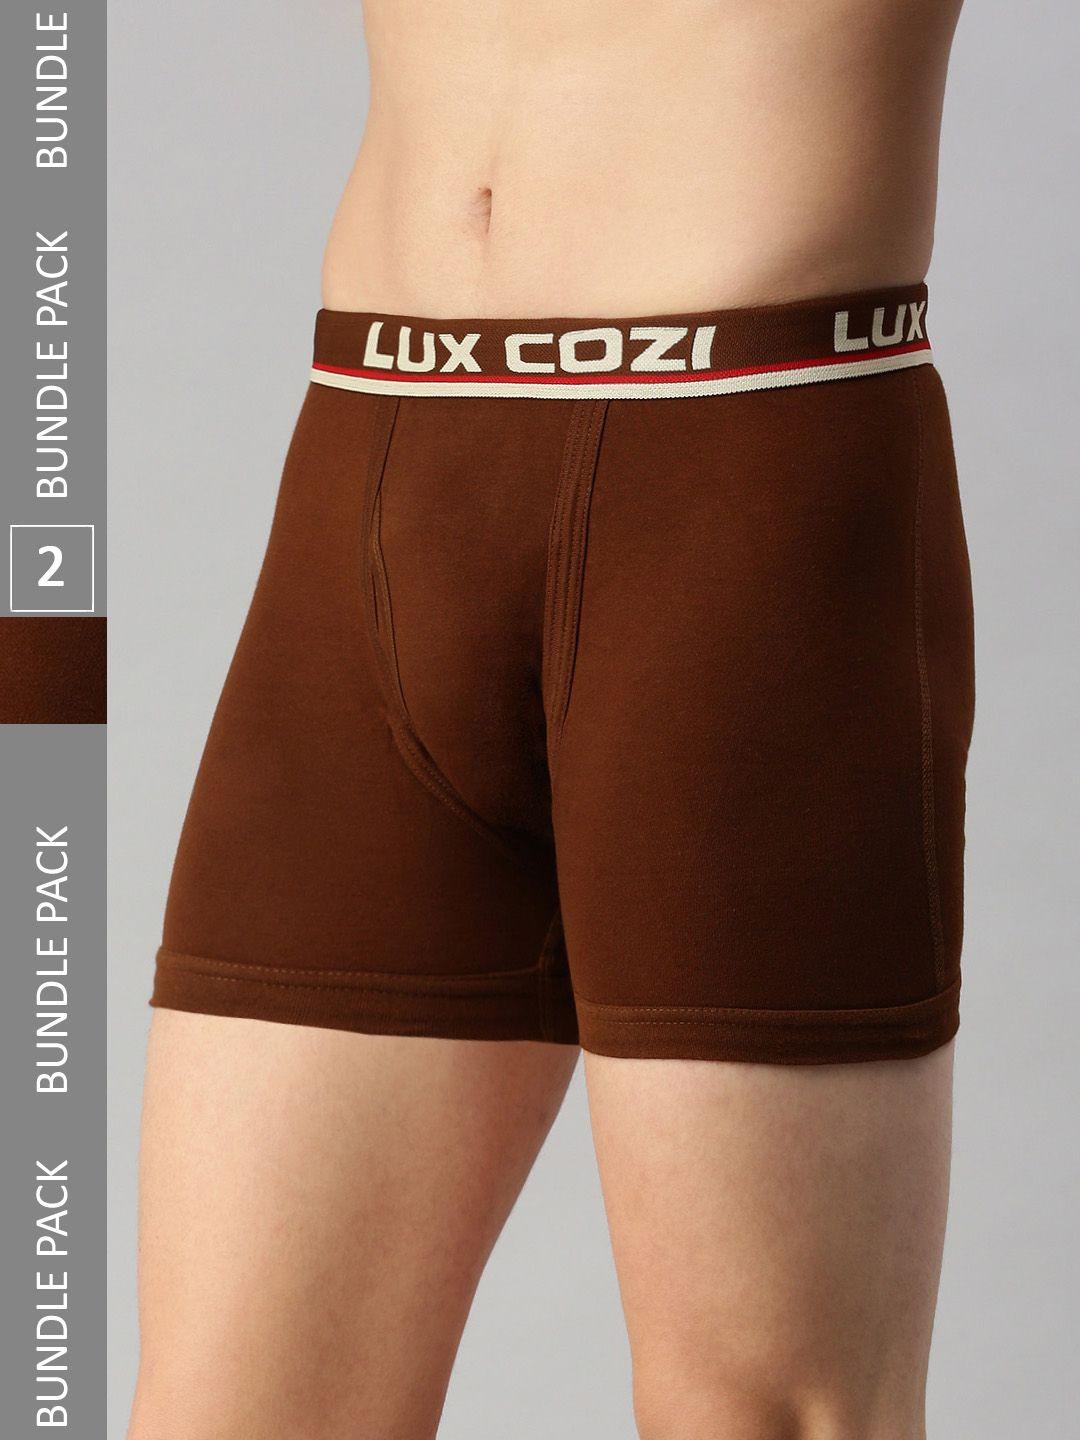 lux cozi pack of 2 outer elastic sleek and comfortable trunks cozi_intlock_mst_2pc